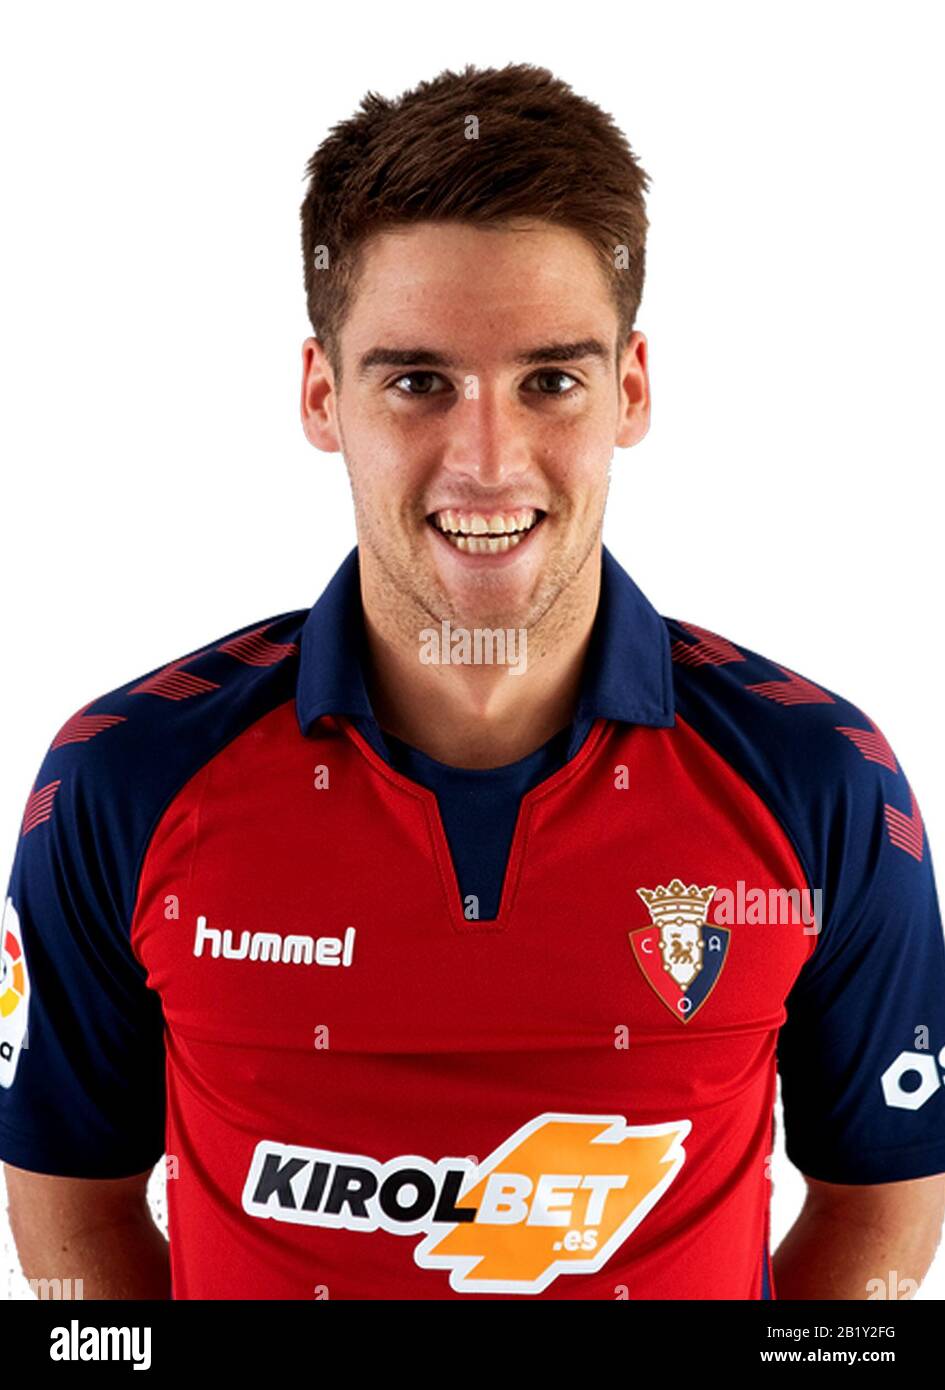 Atletico osasuna hi-res stock photography and images - Alamy